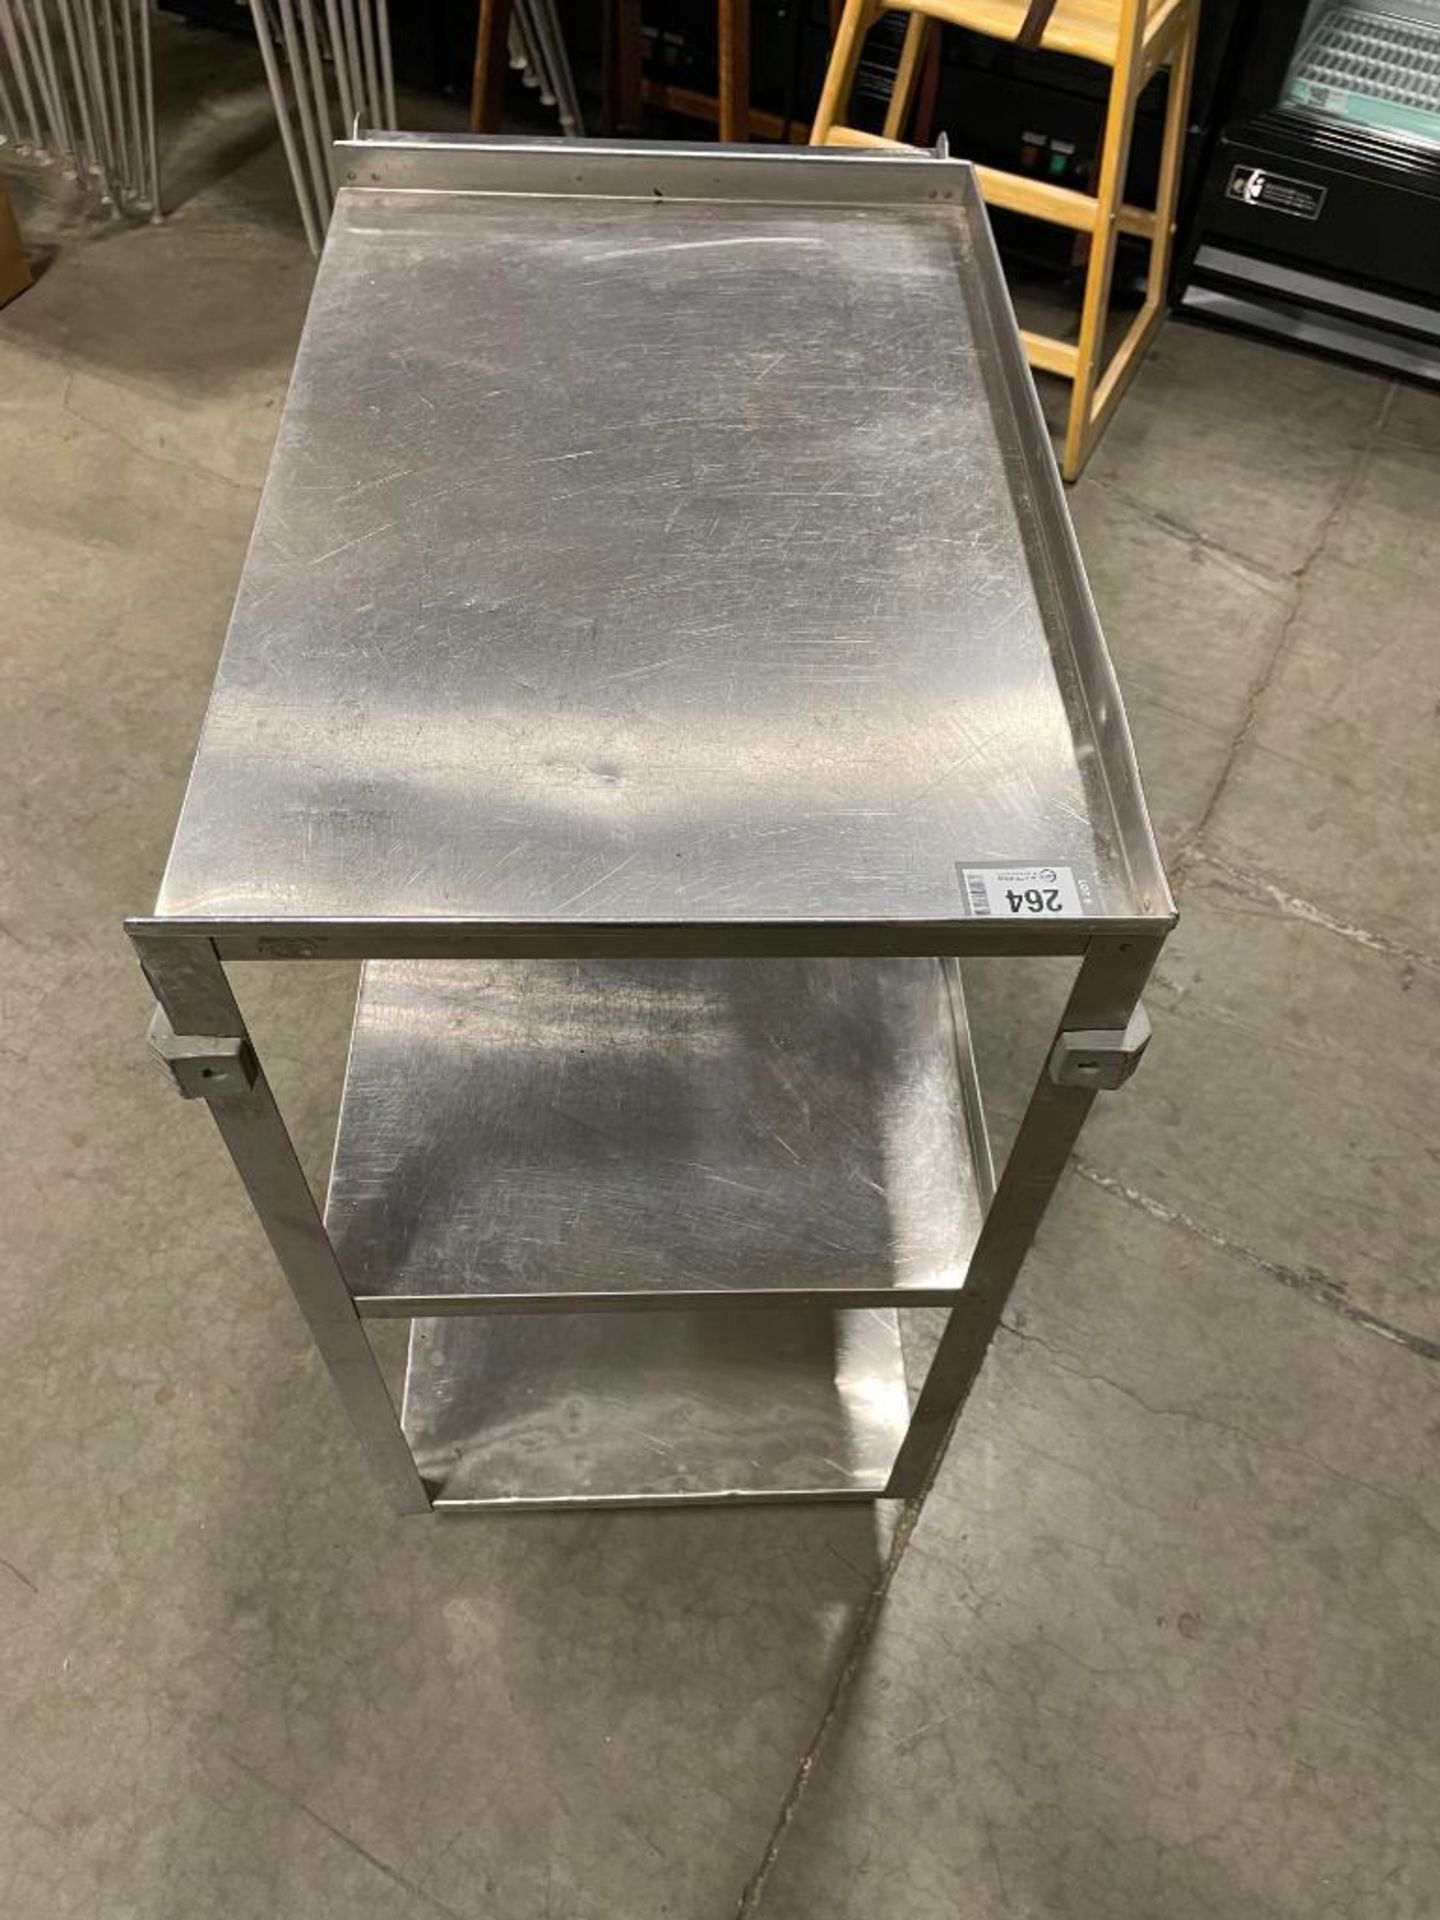 LAKESIDE 411 STAINLESS STEEL UTILITY CART 15" X 24" - 500 LB CAPACITY - Image 5 of 6